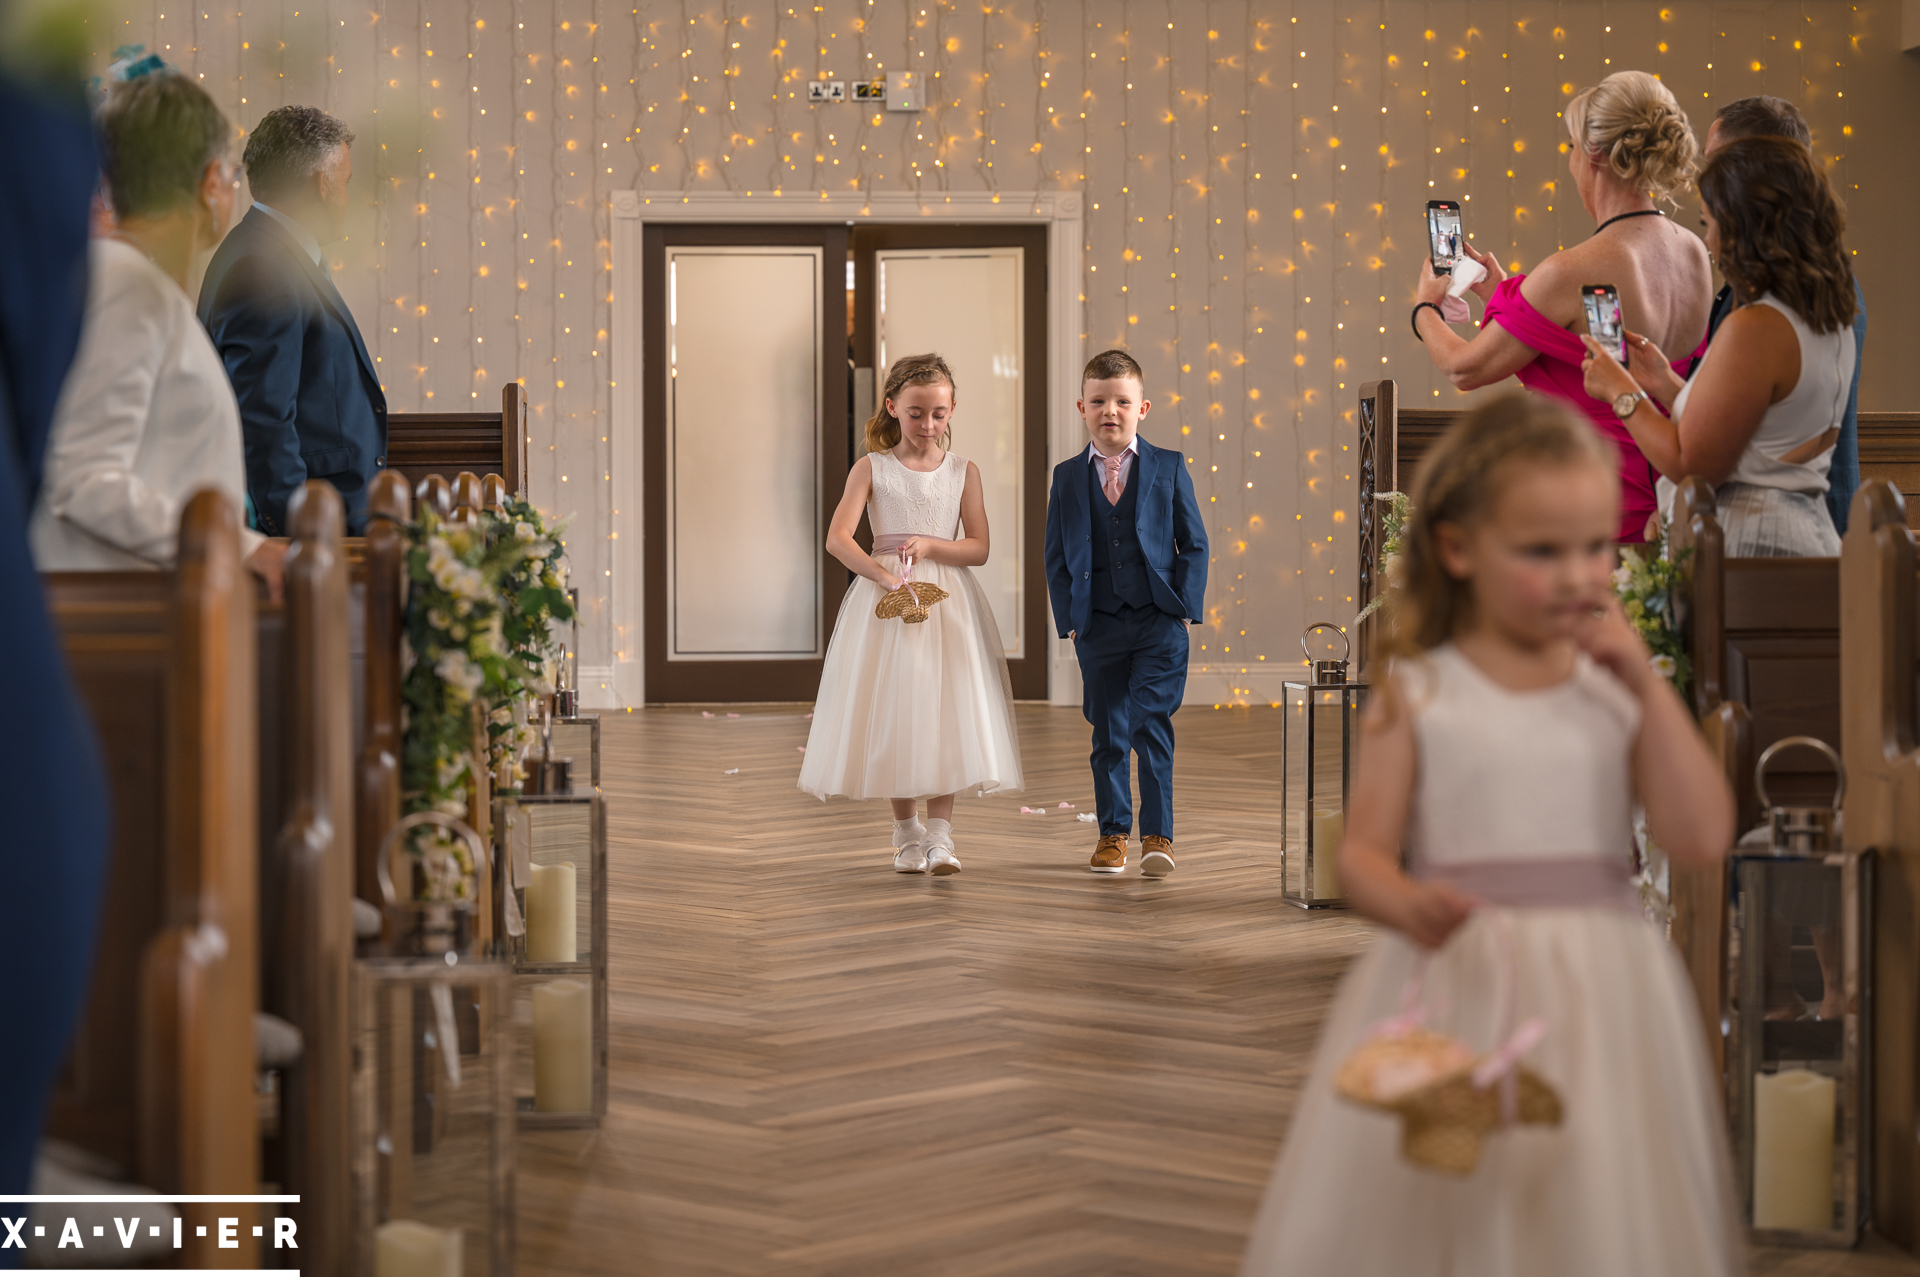 pageboy and flowergirl walk down the aisle